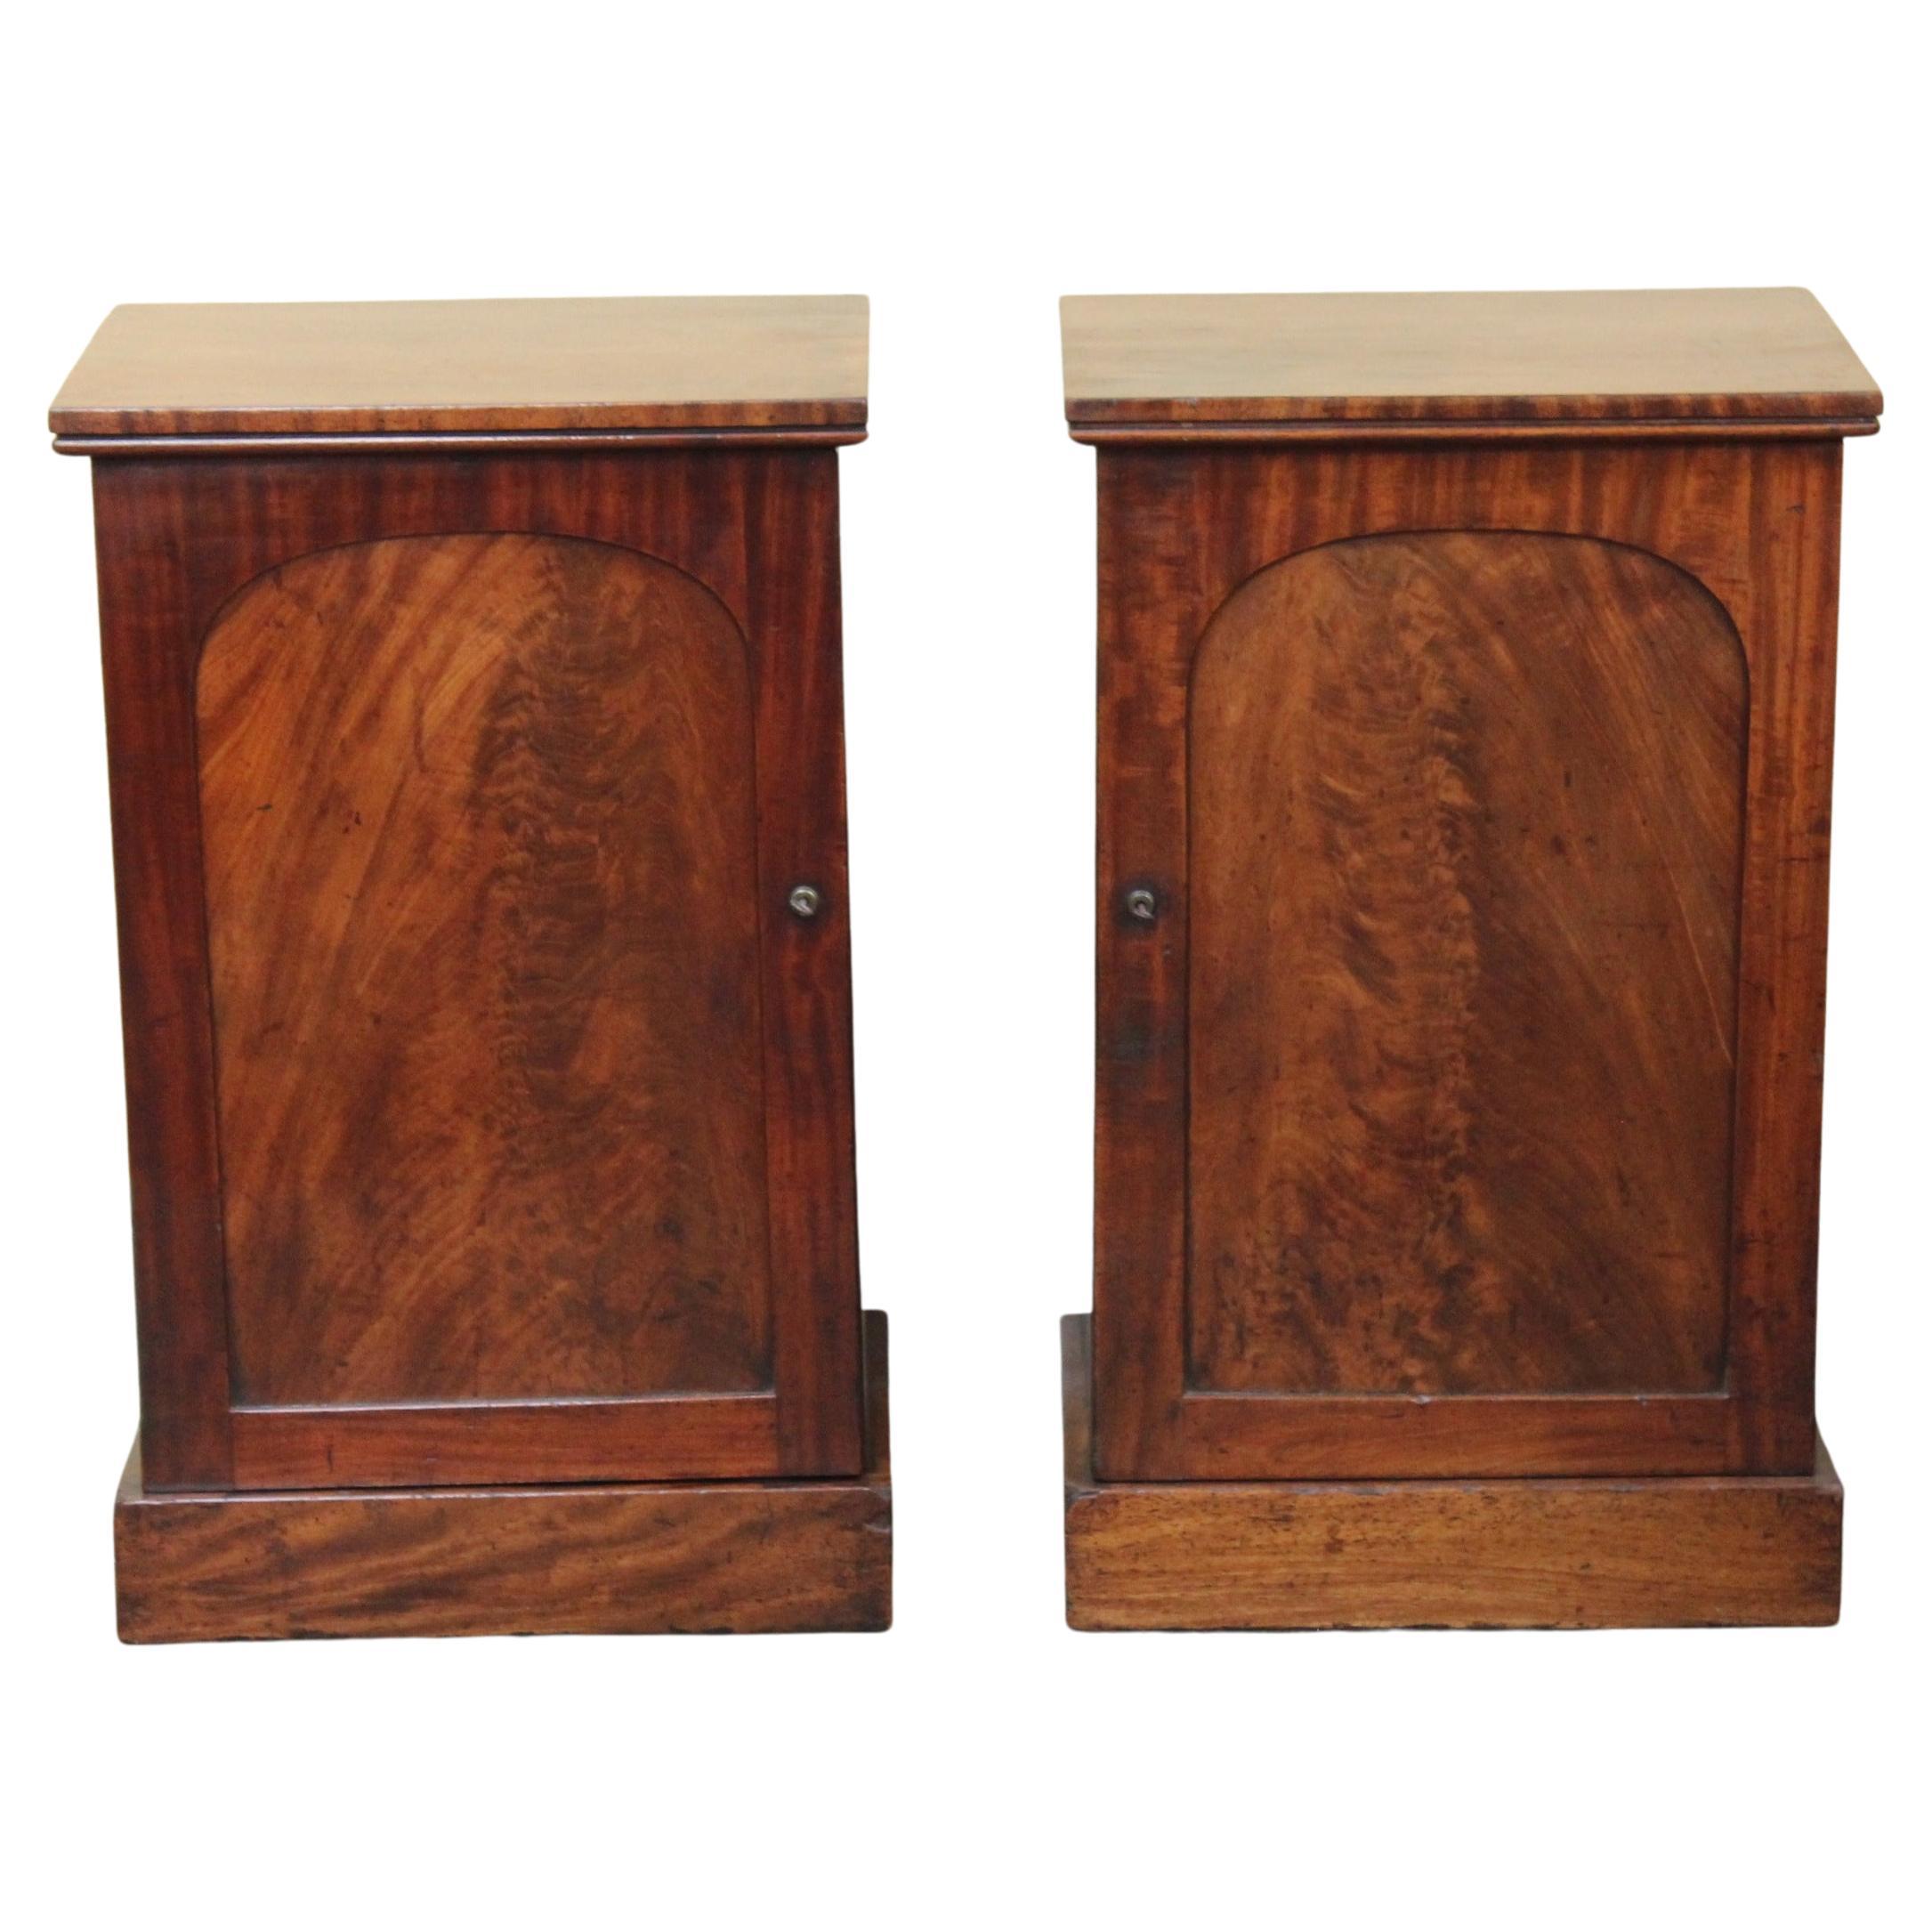 Pair of 19thc Mahogany Pedestal Bedside Cupboards